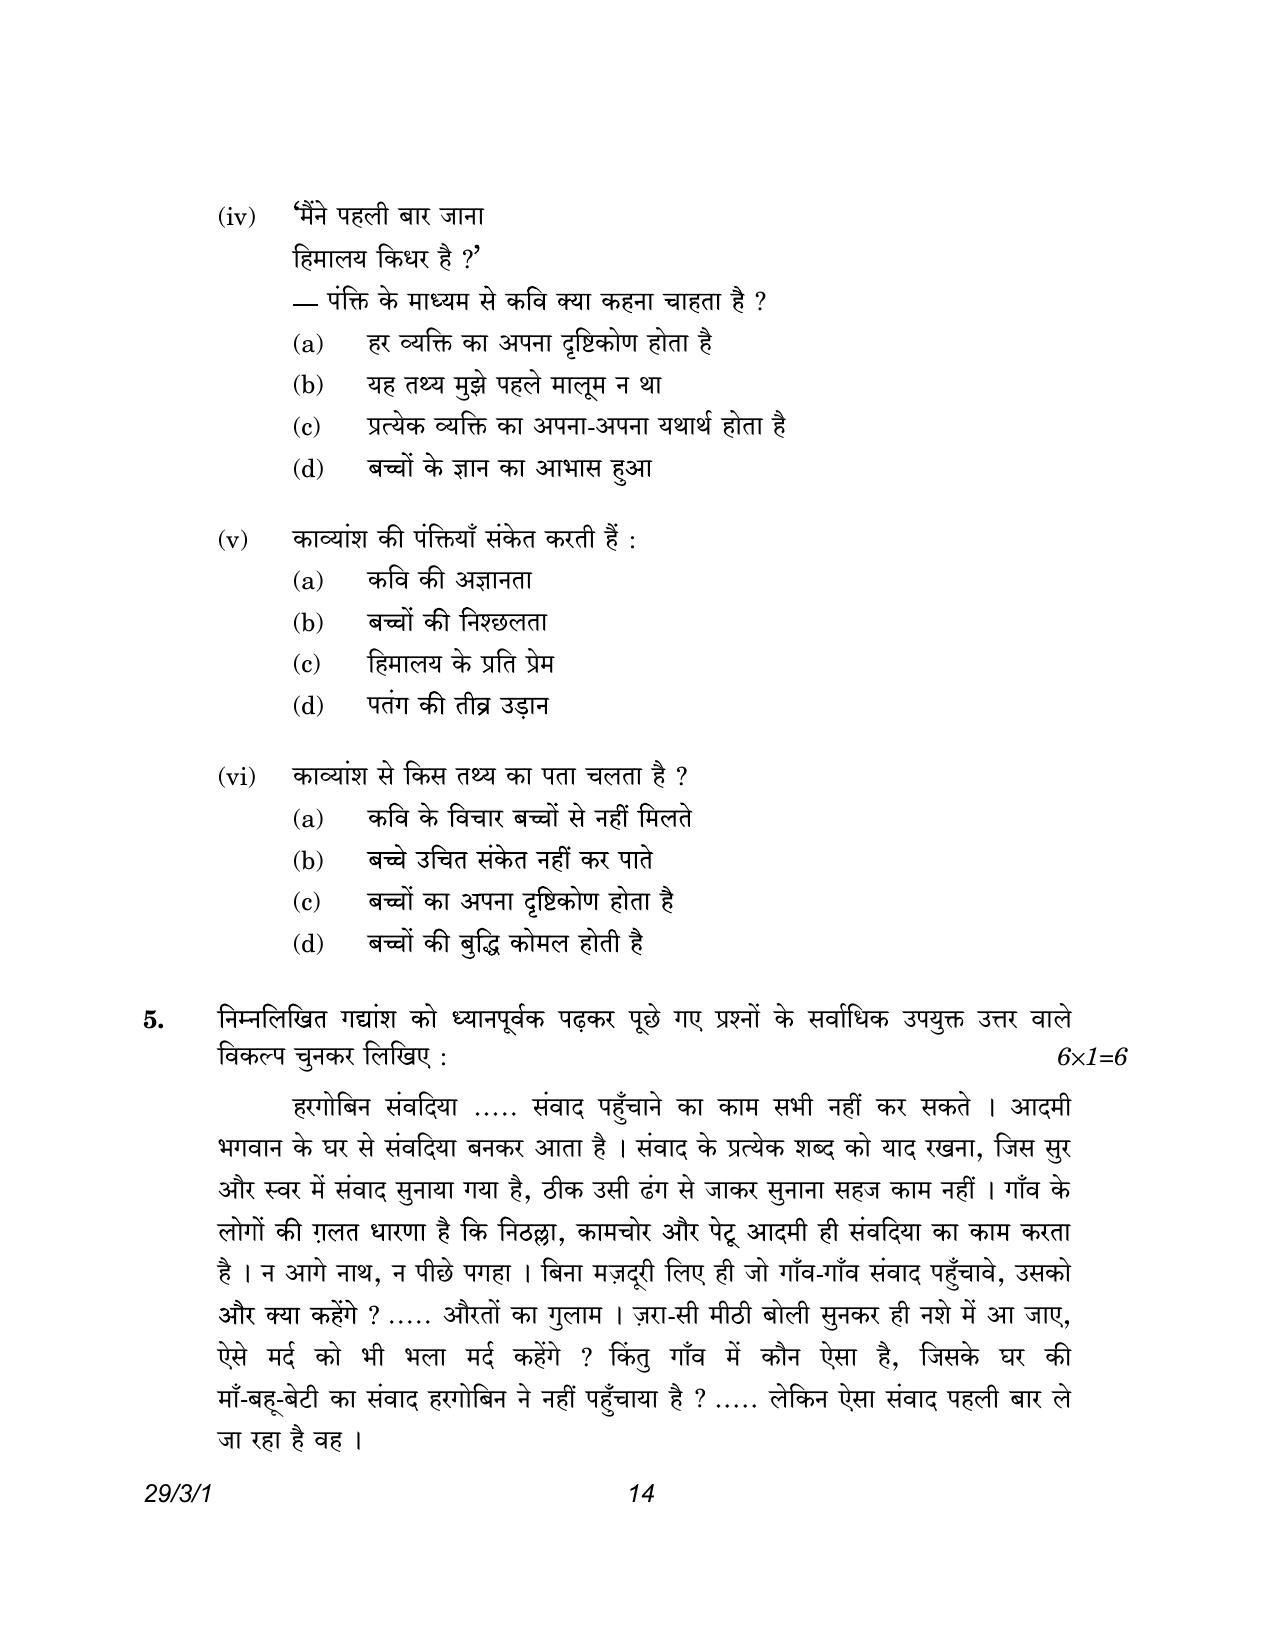 CBSE Class 12 29-3-1 Hindi Elective 2023 Question Paper - Page 14